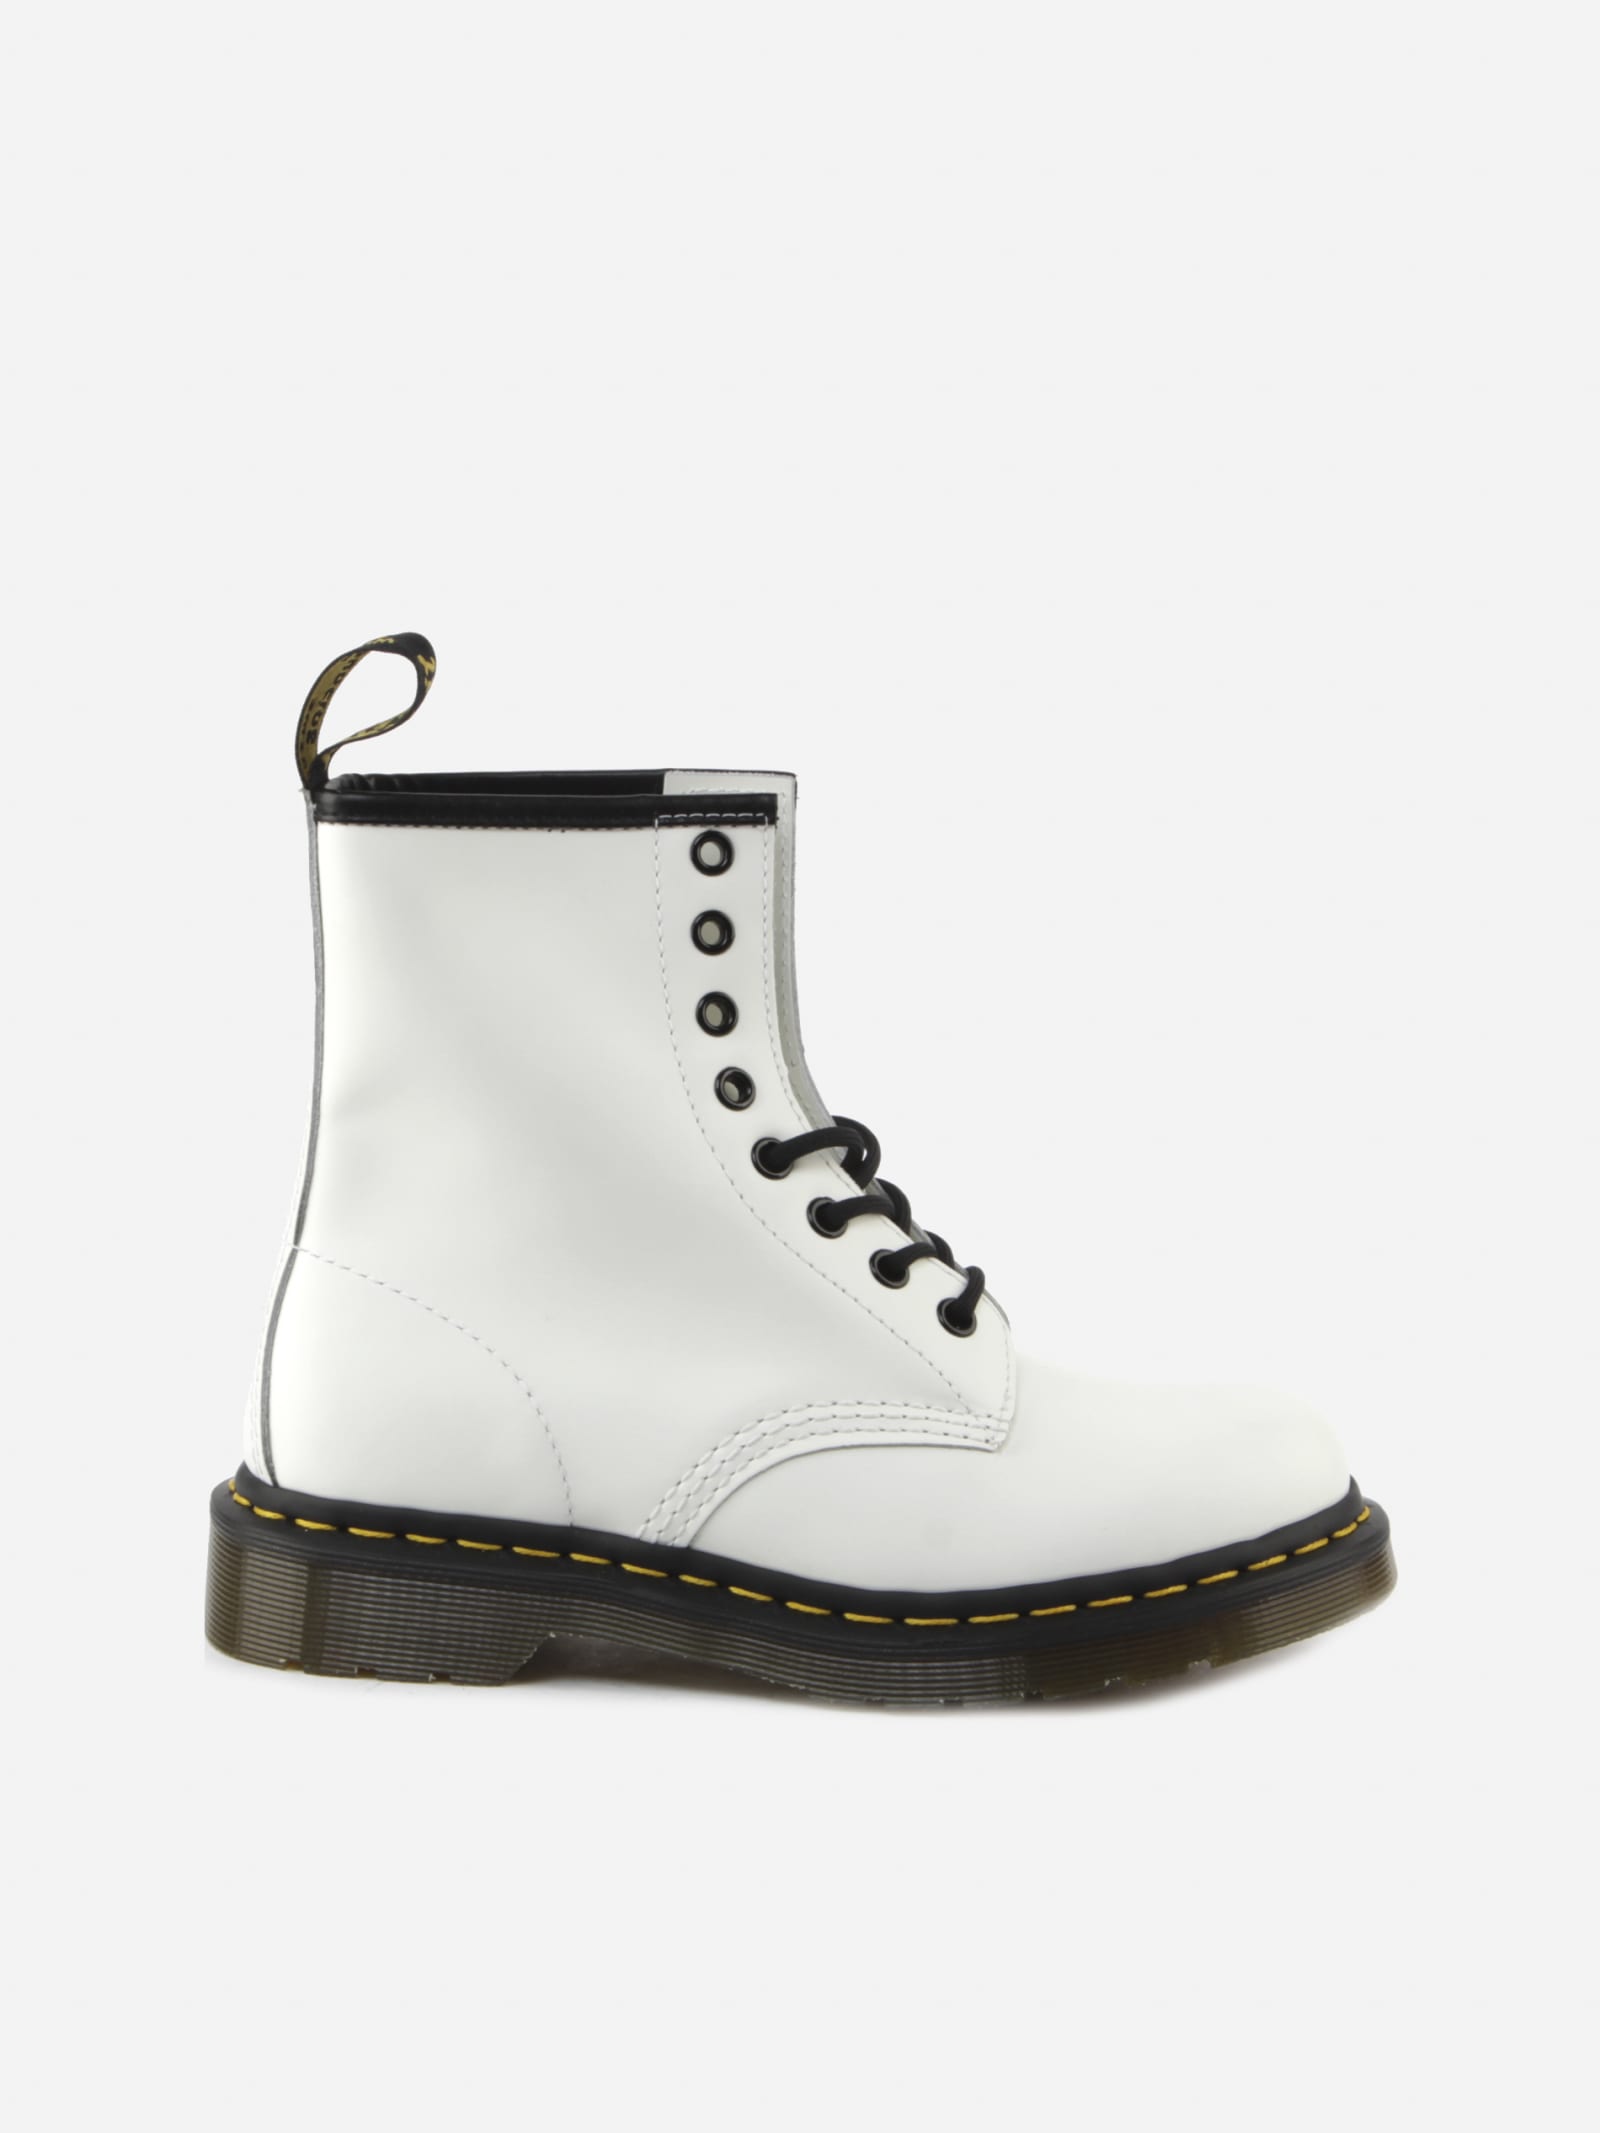 Dr. Martens 1460 Combat Boots In Smooth Leather With Contrasting Stitching